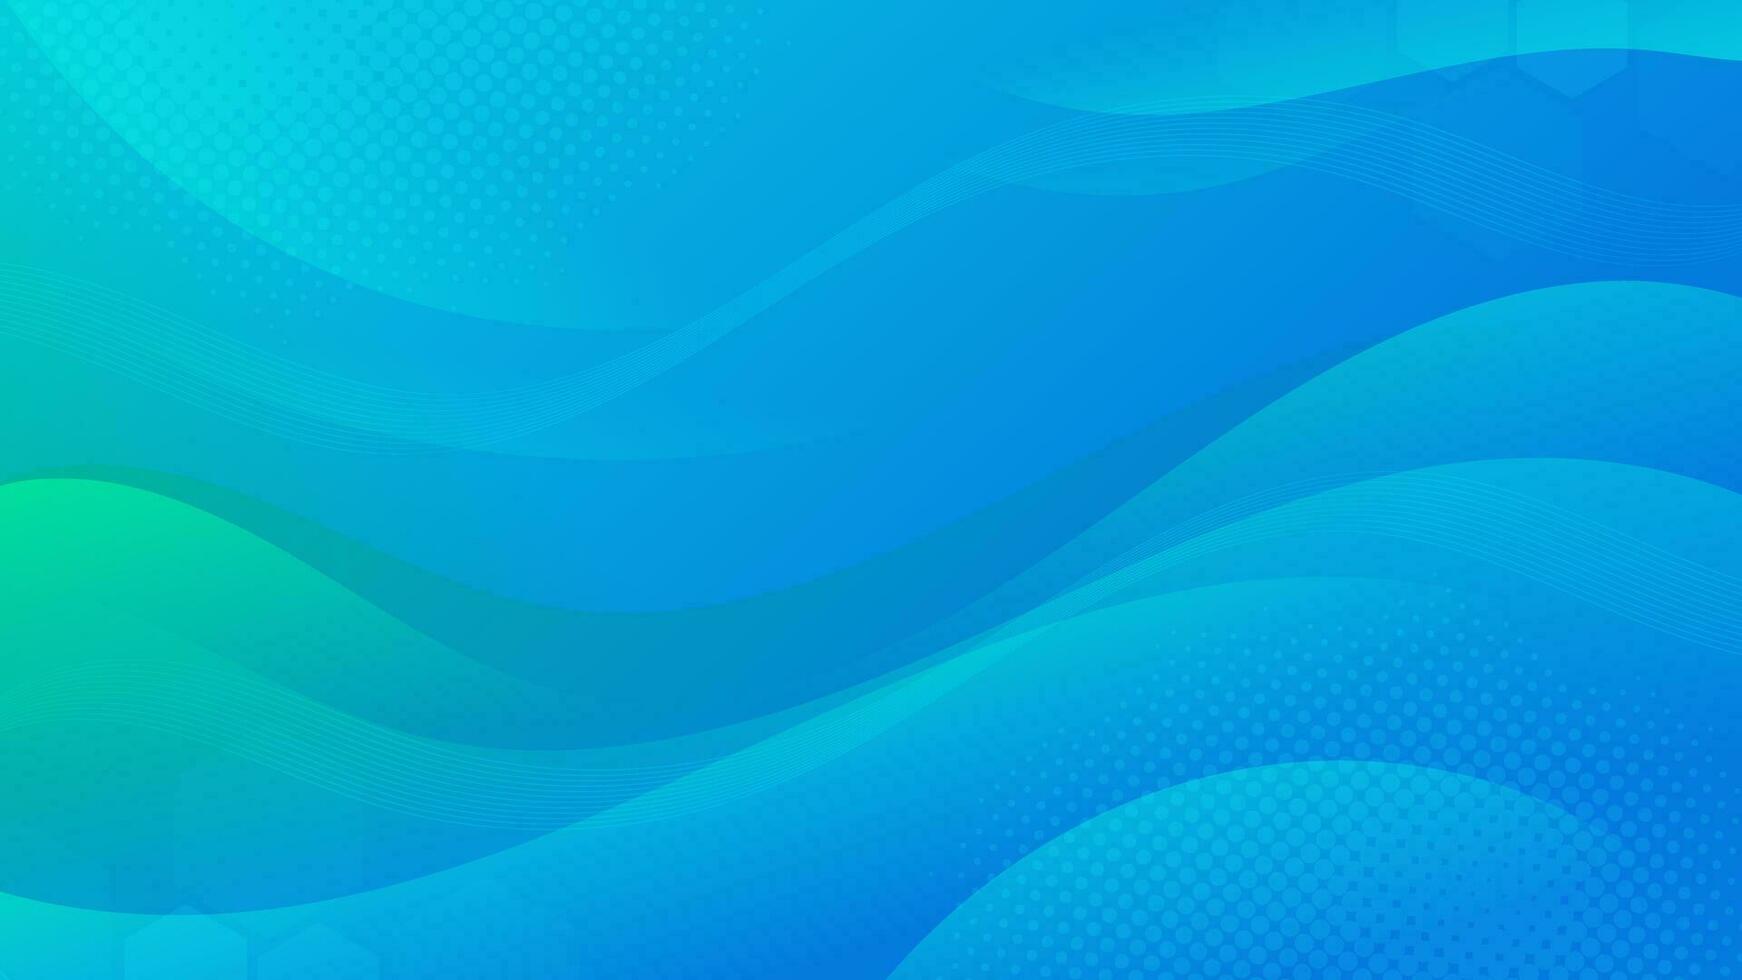 Abstract green blue Background with Wavy Shapes. flowing and curvy shapes. This asset is suitable for website backgrounds, flyers, posters, and digital art projects. vector